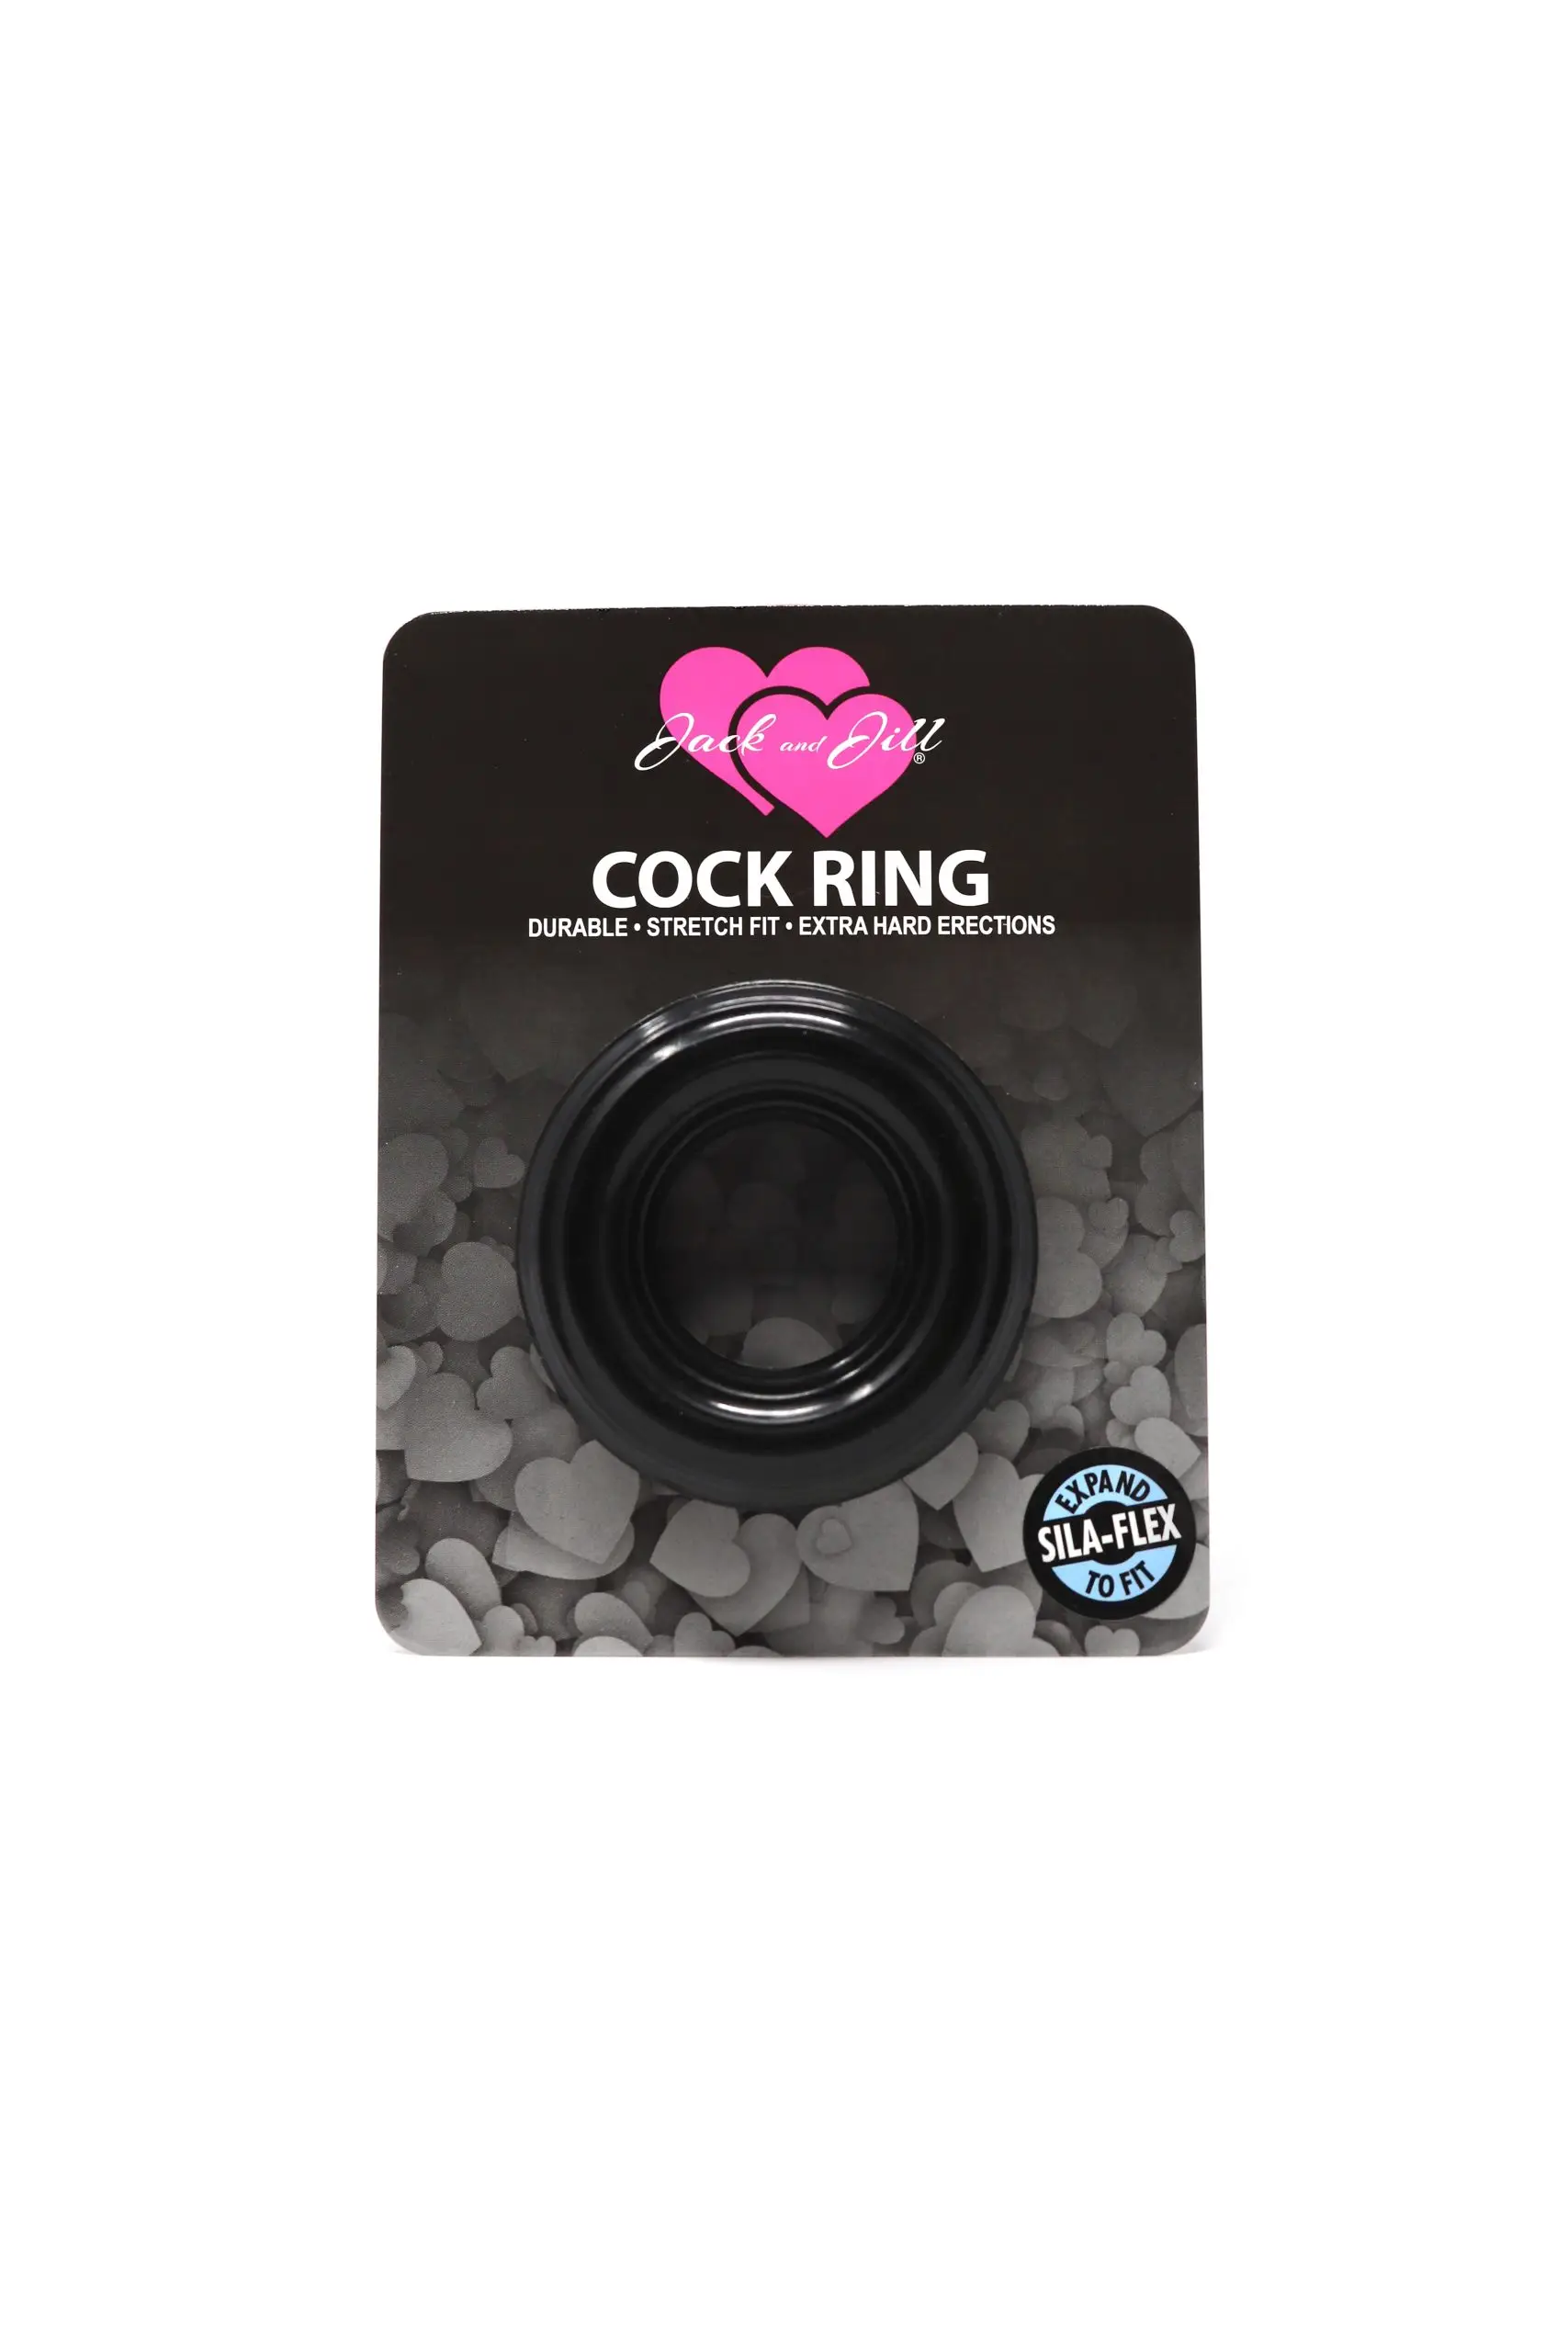 Jack and Jill Cock Ring Ribbed Donut (1 inch) Black cock ring